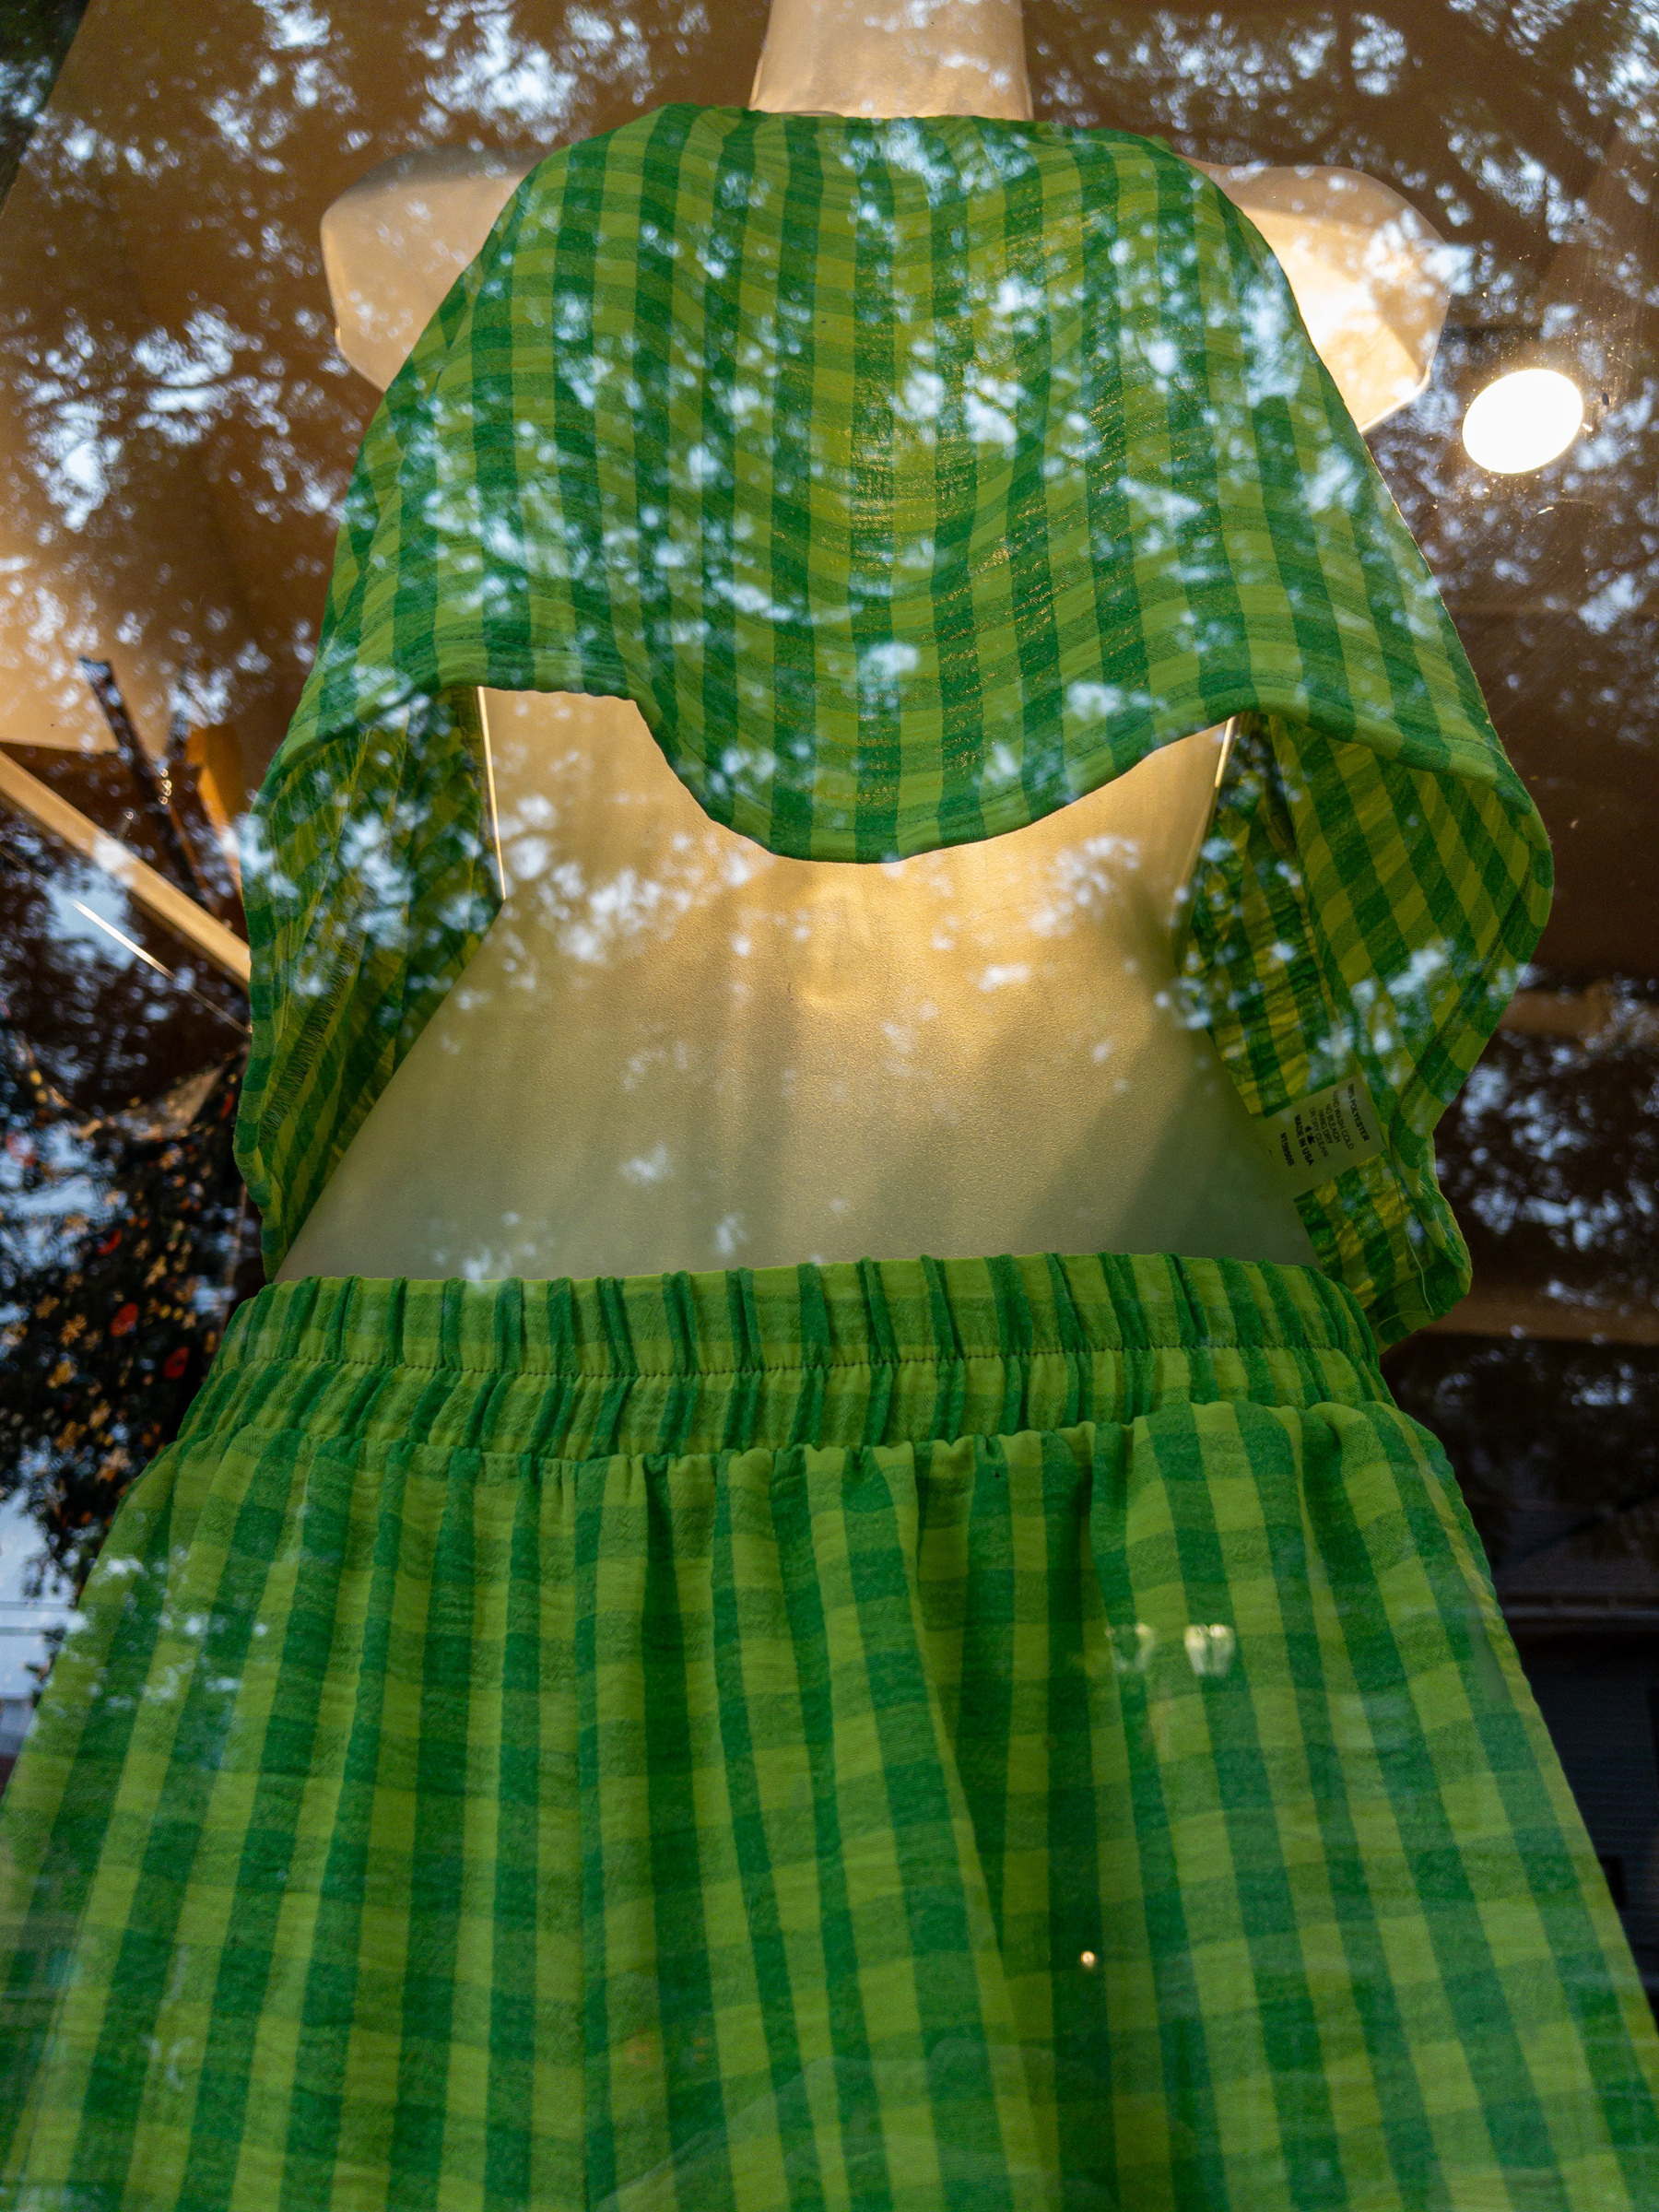 Green plaid woman’s halter top and pants on a translucent mannequin bust form, lit from behind. Reflections of trees overlaid.